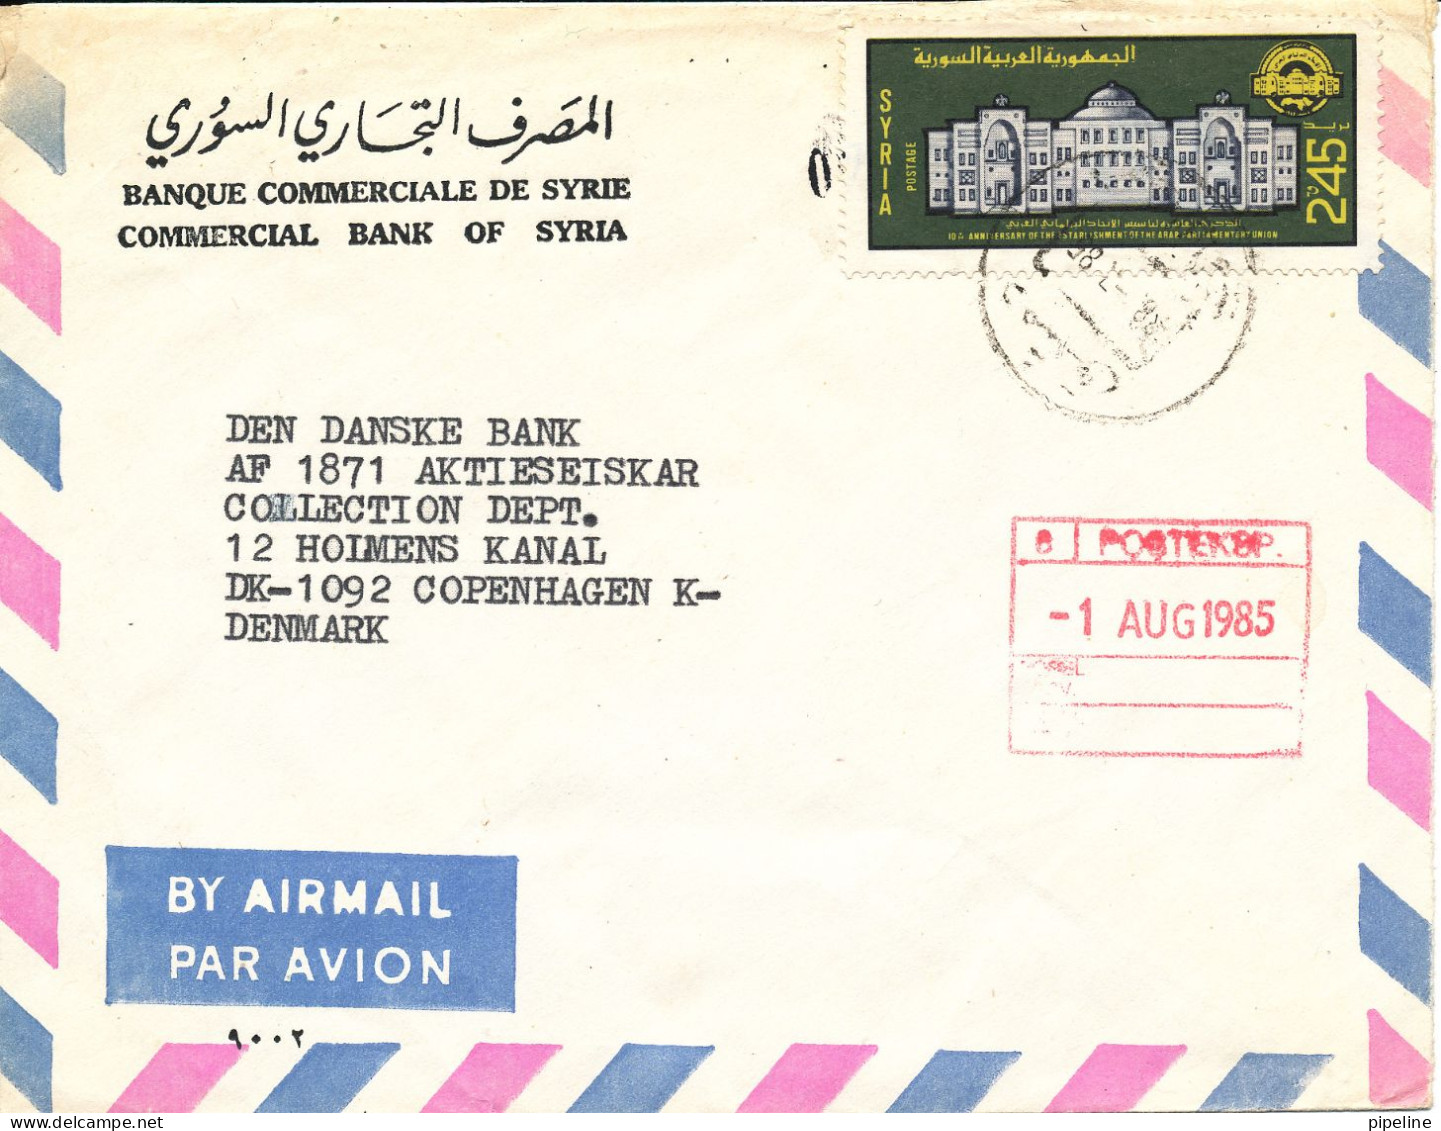 Syria Air Mail Bank Cover Sent To Denmark 28-7-1985 (Commercial Bank Of Syria) - Syria